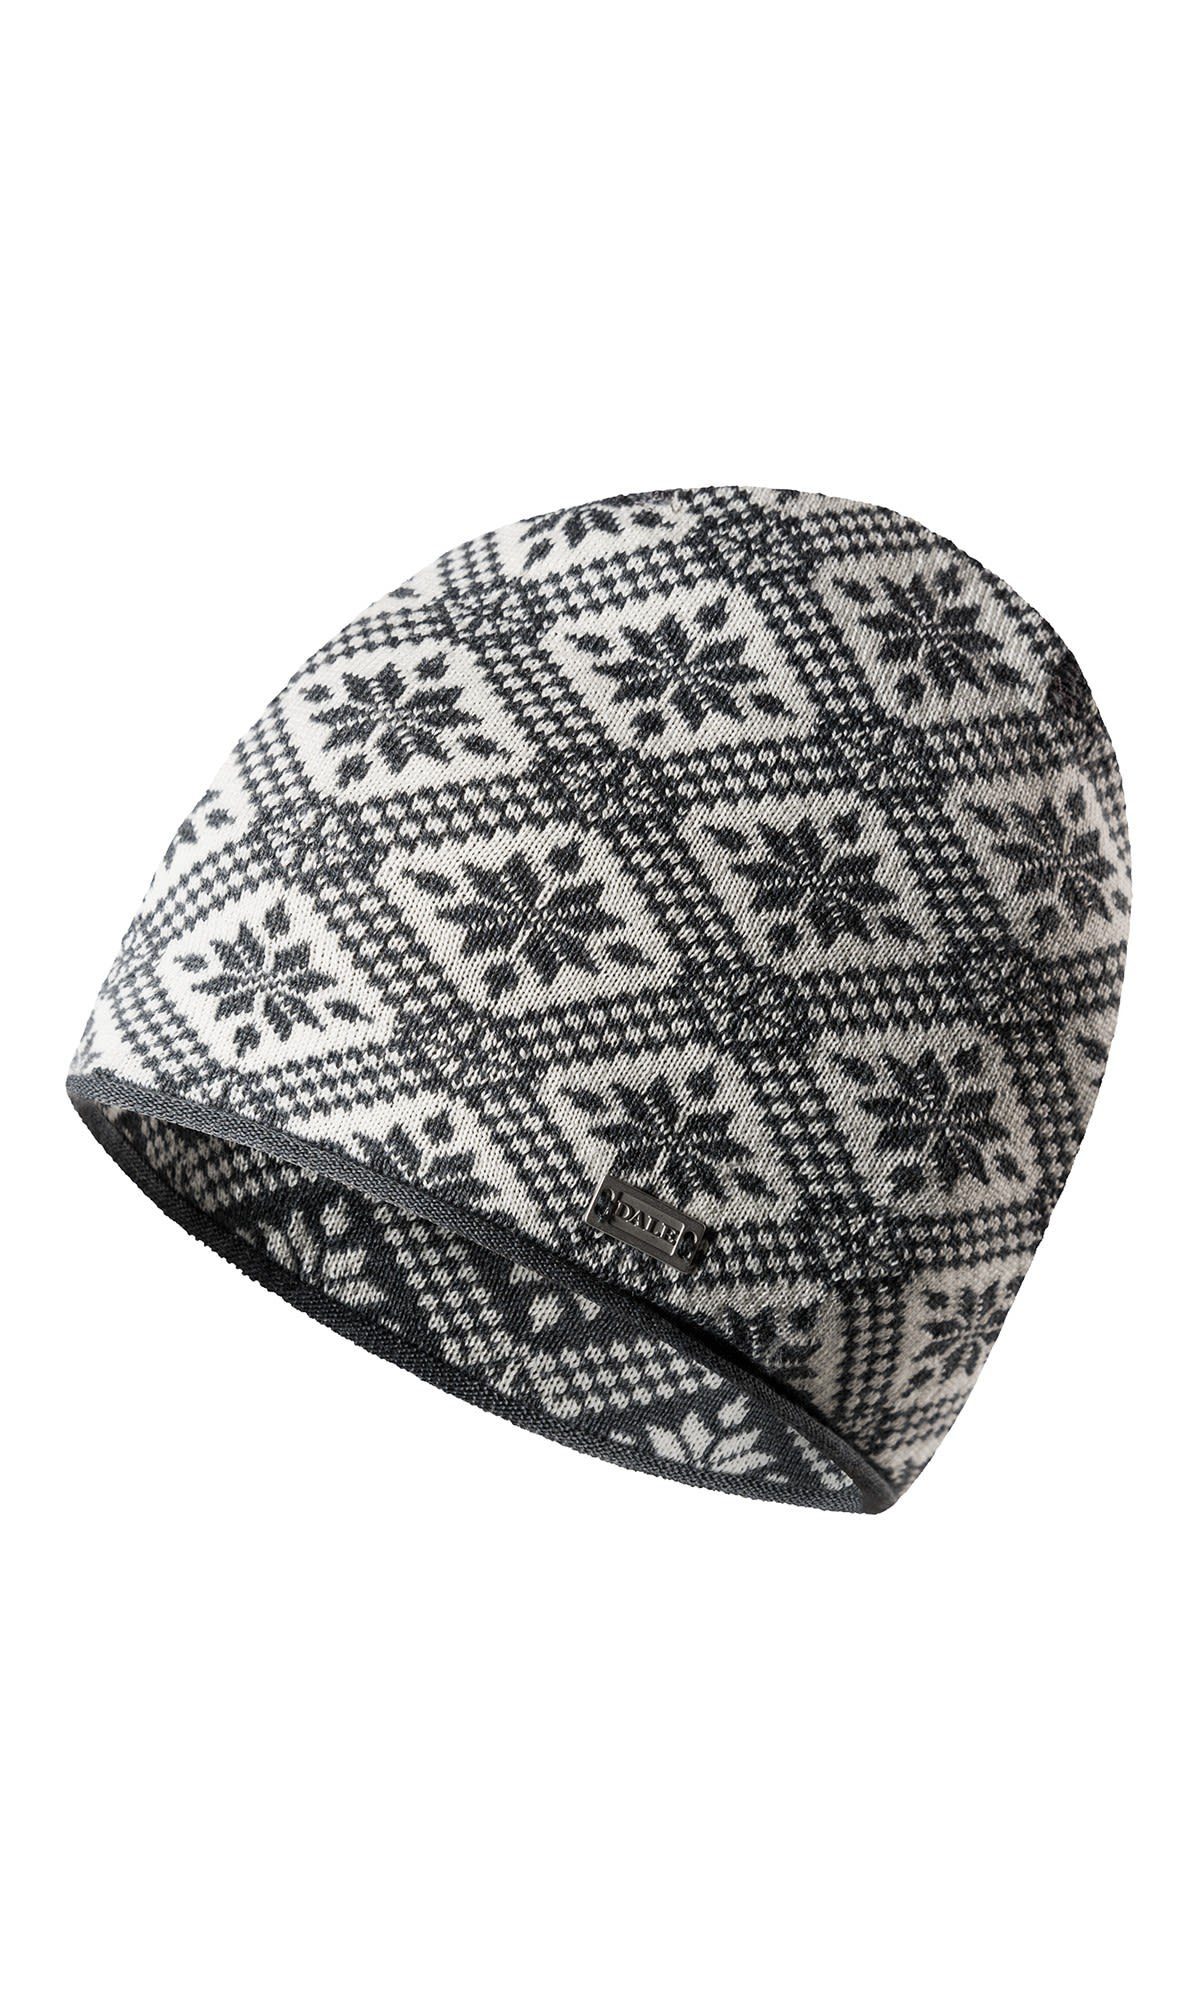 Dale of Norway Beanie Dale W Of Schiefer Norway Christiania Hat Accessoires Damen Offwhite 